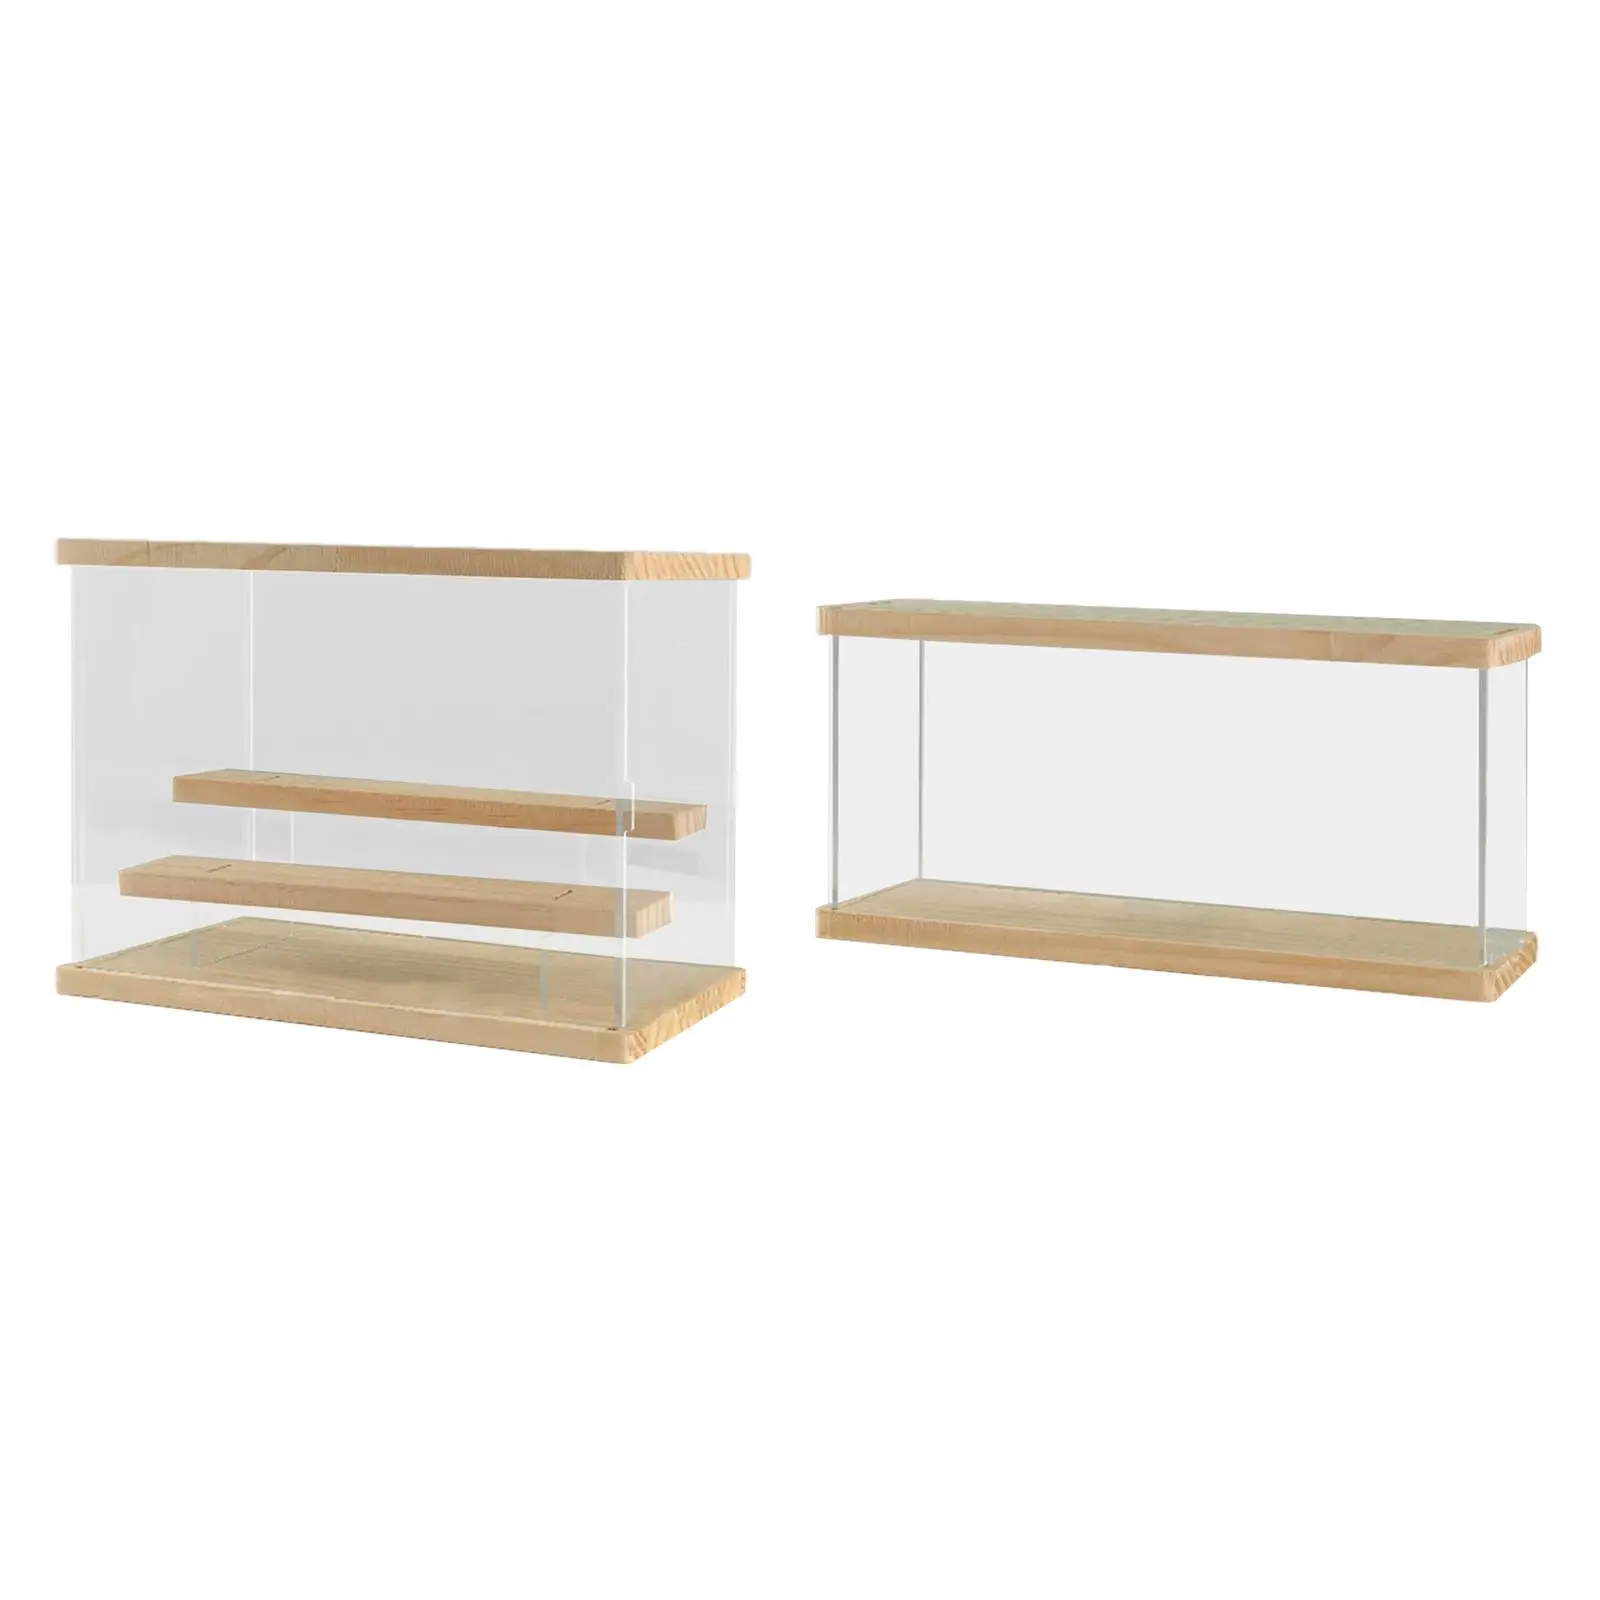 Display Storage Box Dustproof Showcase Acrylic Display Case for Action Figures